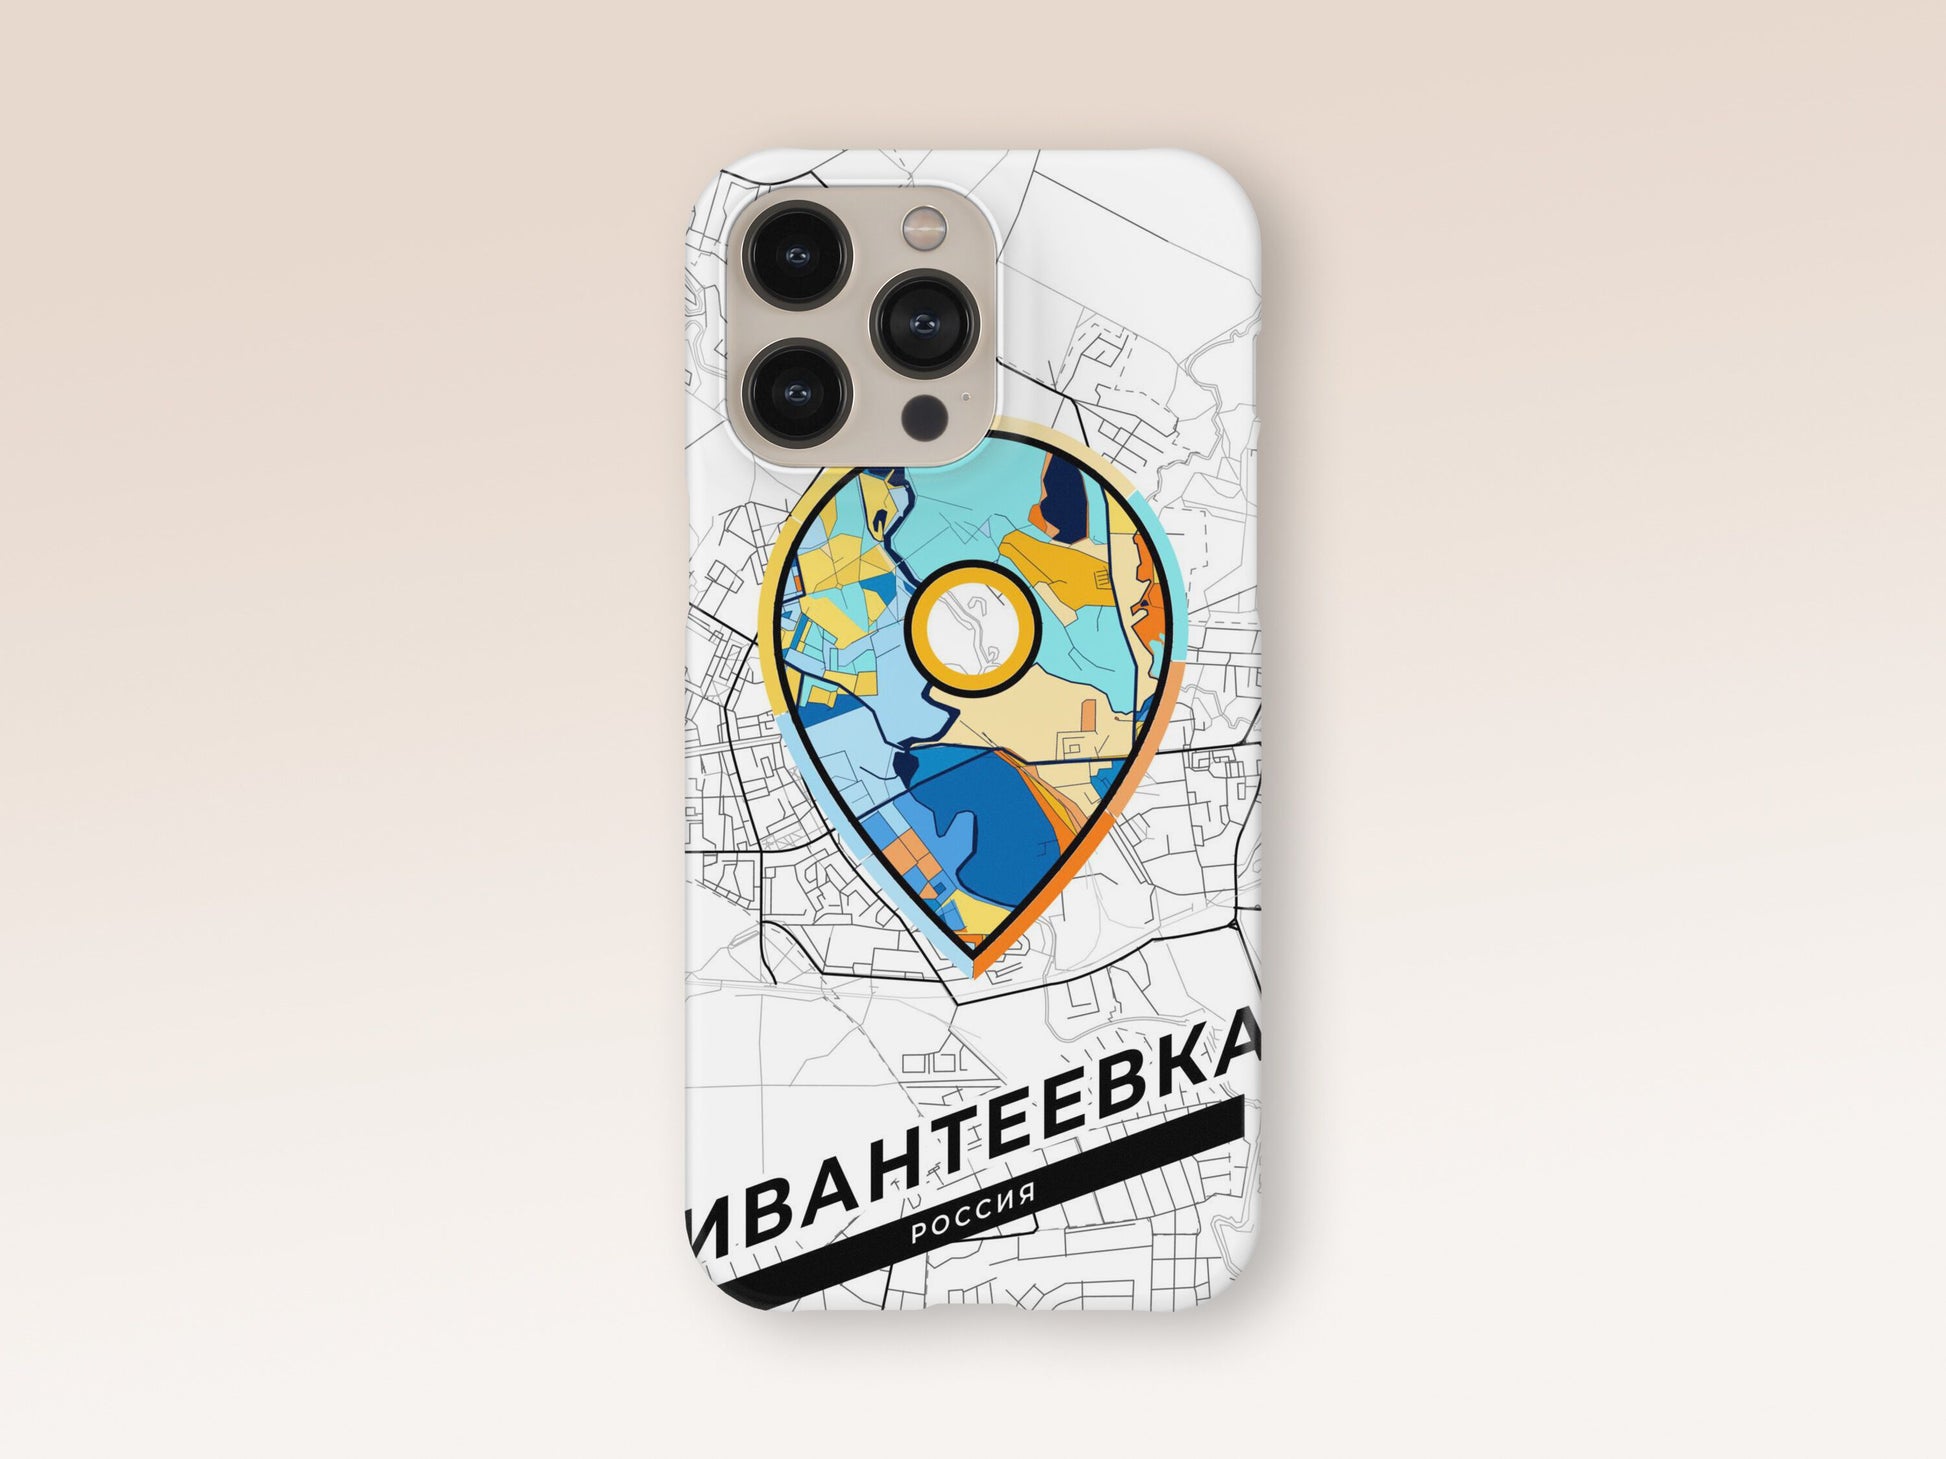 Ivanteyevka Russia slim phone case with colorful icon. Birthday, wedding or housewarming gift. Couple match cases. 1